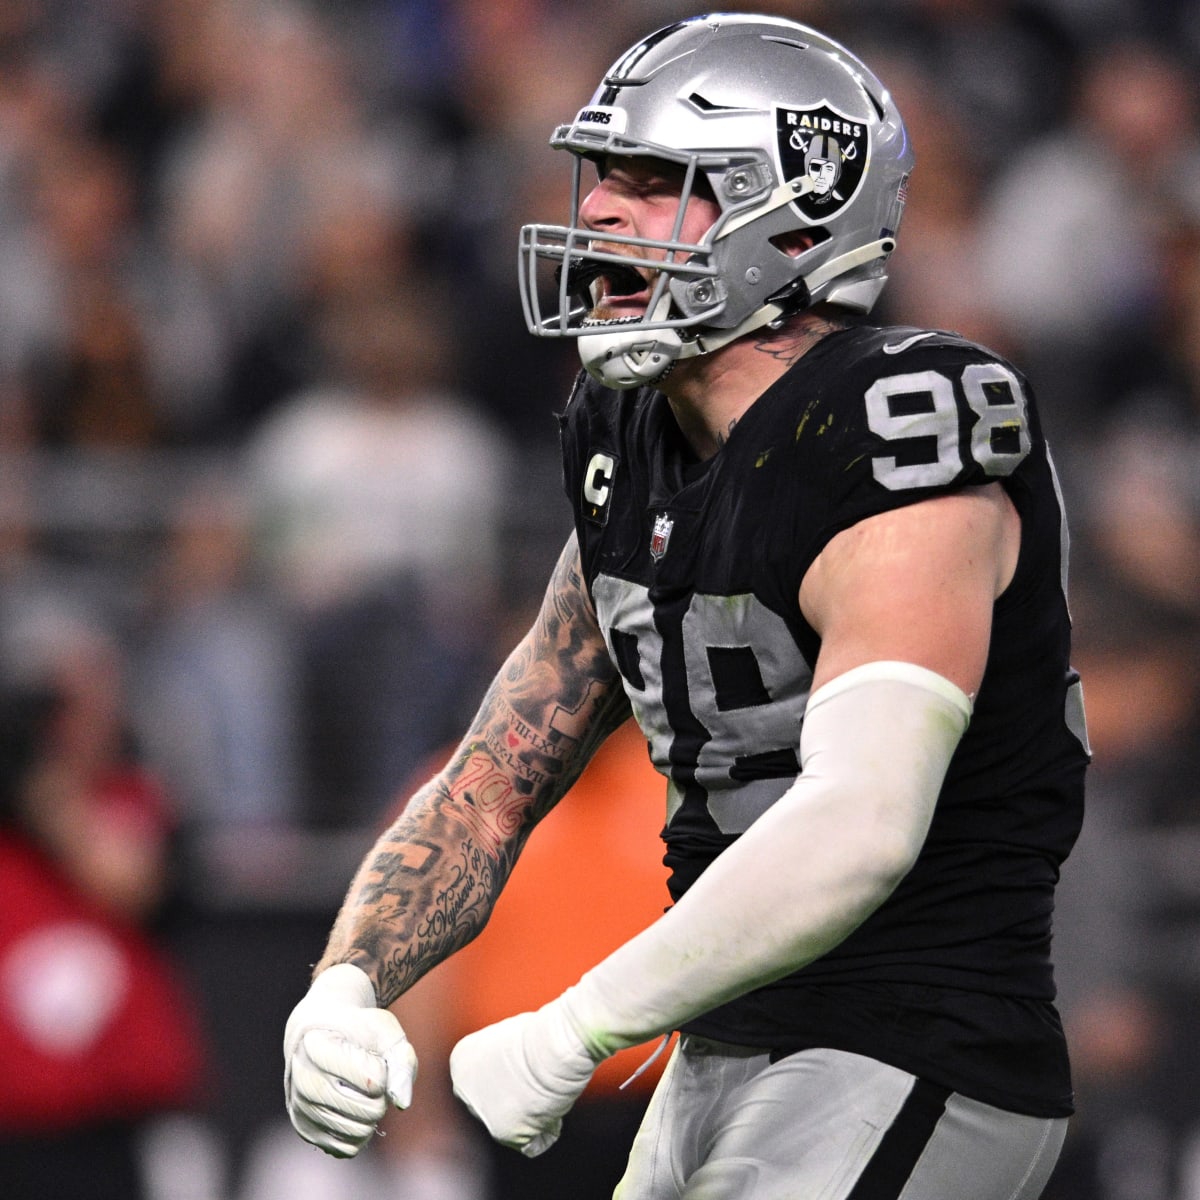 Raiders' Maxx Crosby looks another standout year at training camp - Sports